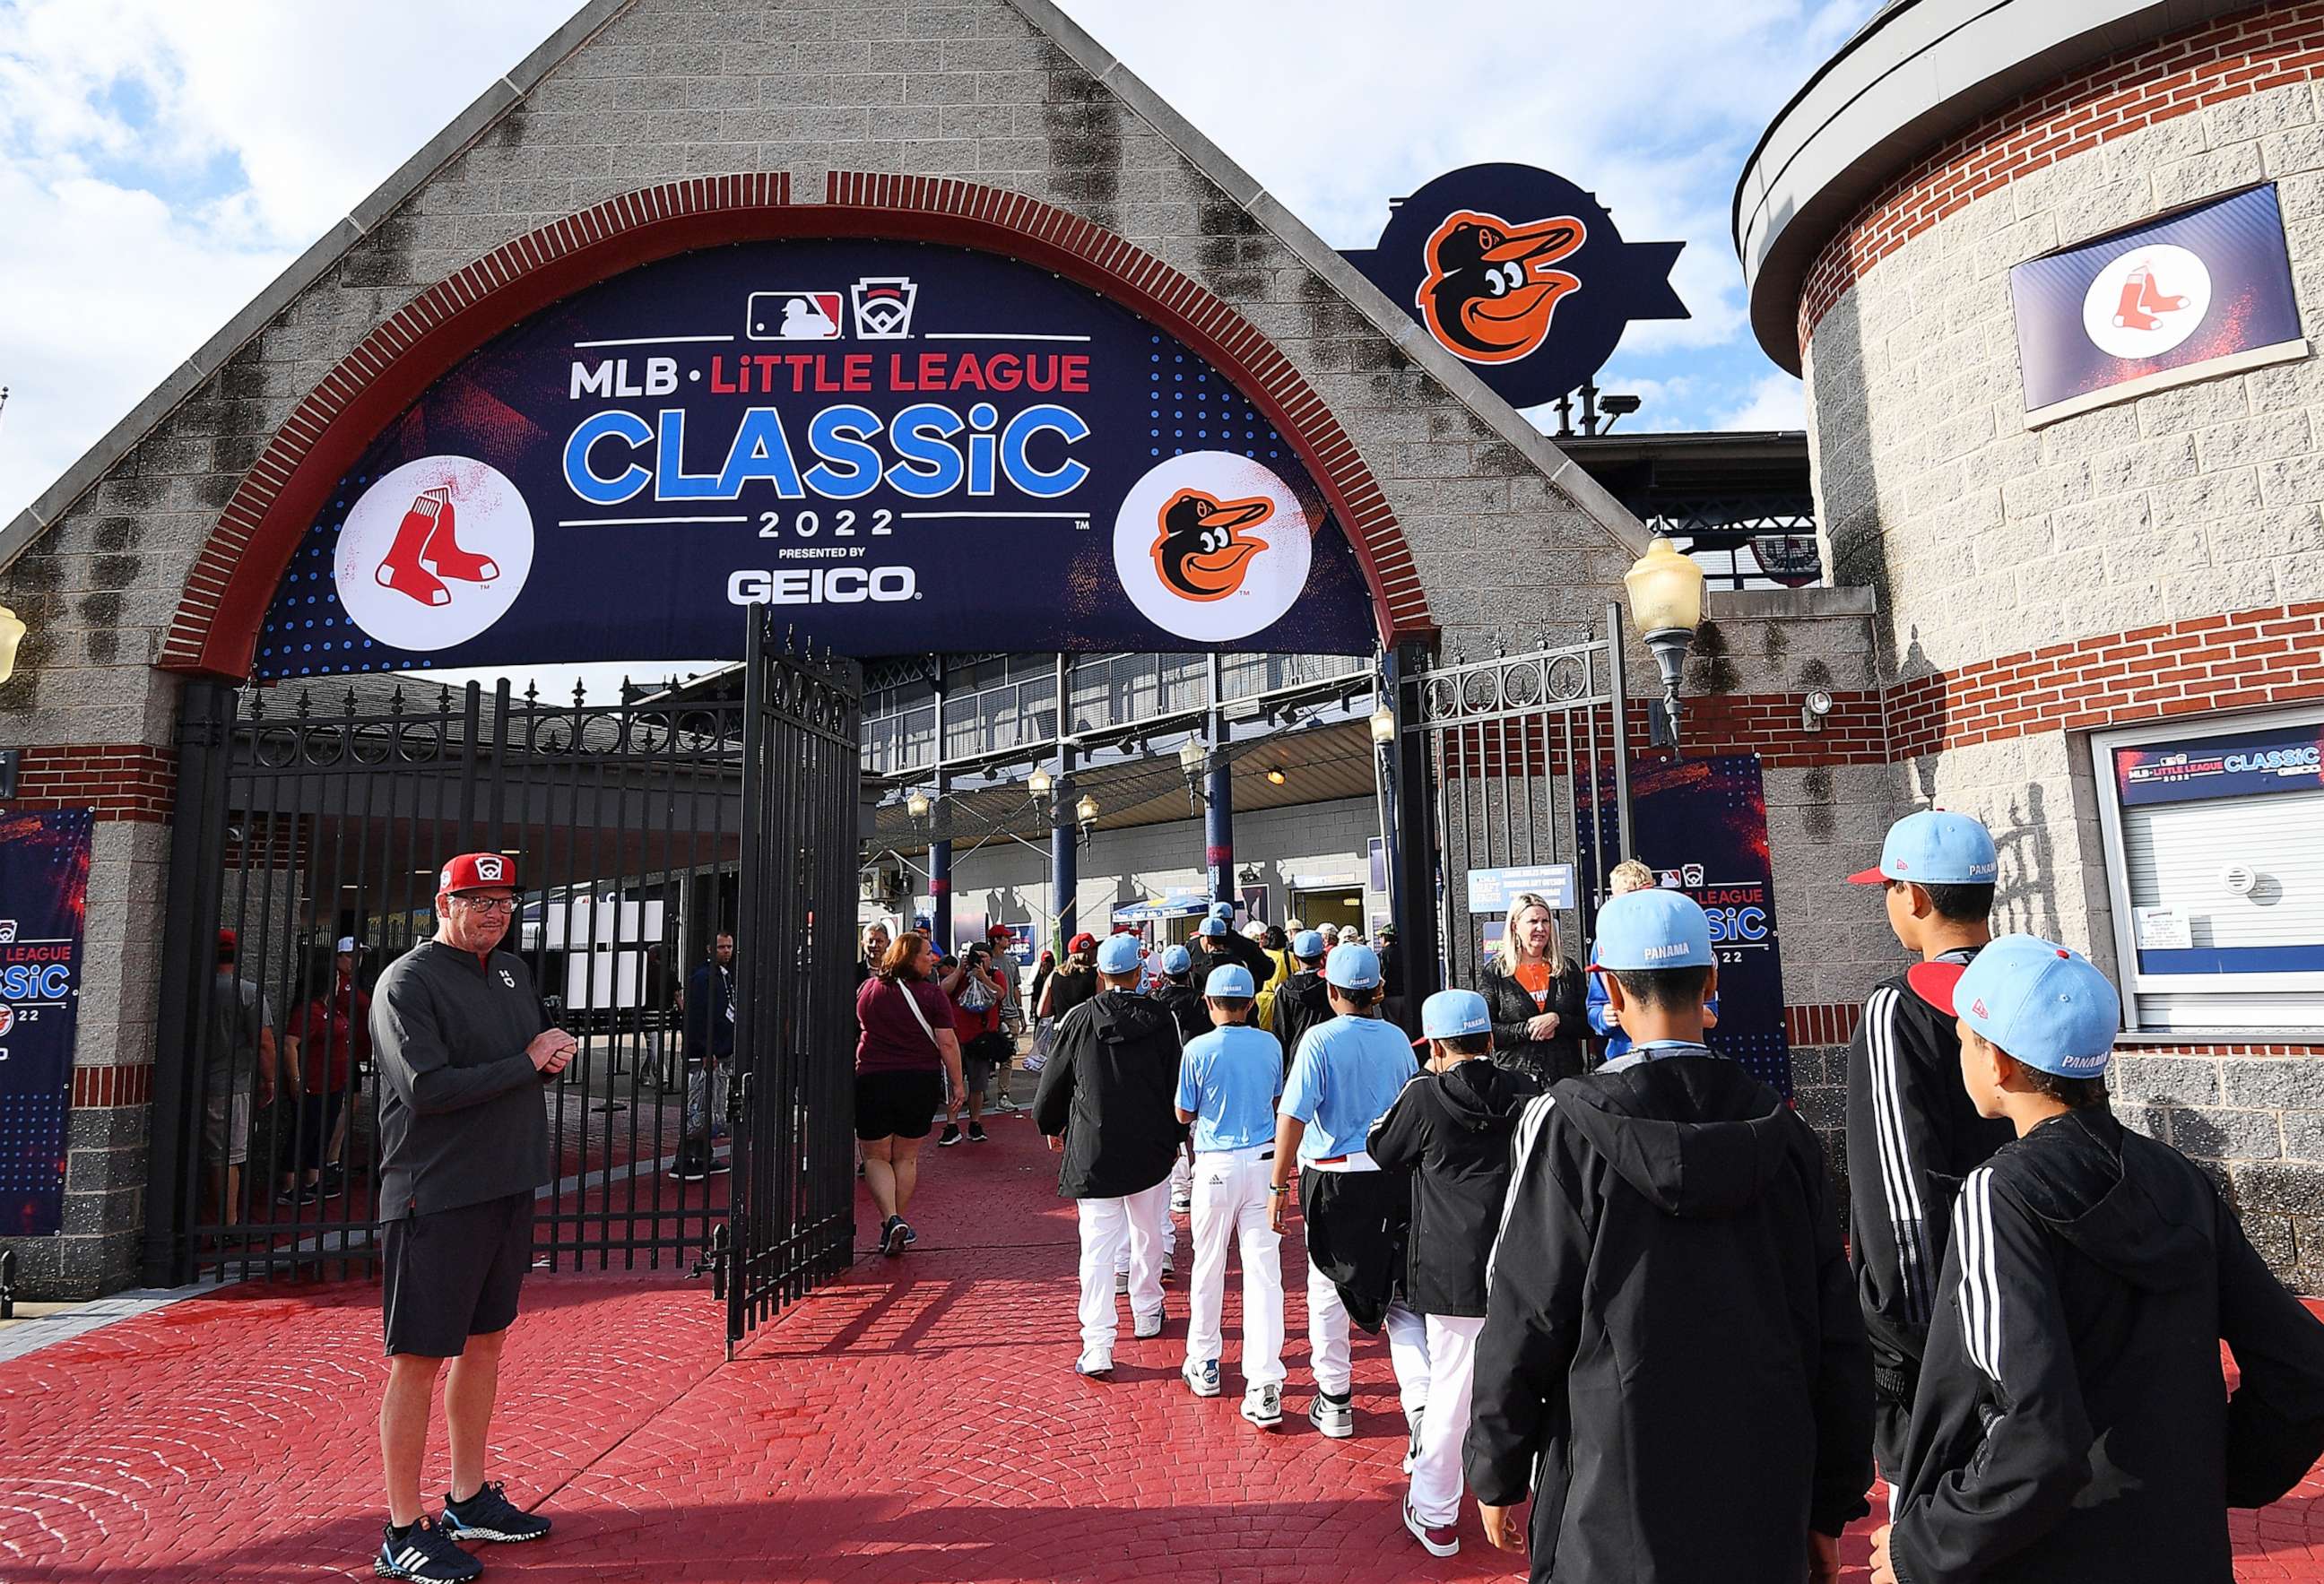 PHOTO: Fans enter the gates prior to the game between the Boston Red Sox and the Baltimore Orioles at Bowman Field on Aug. 21, 2022 in South Williamsport, Penn.